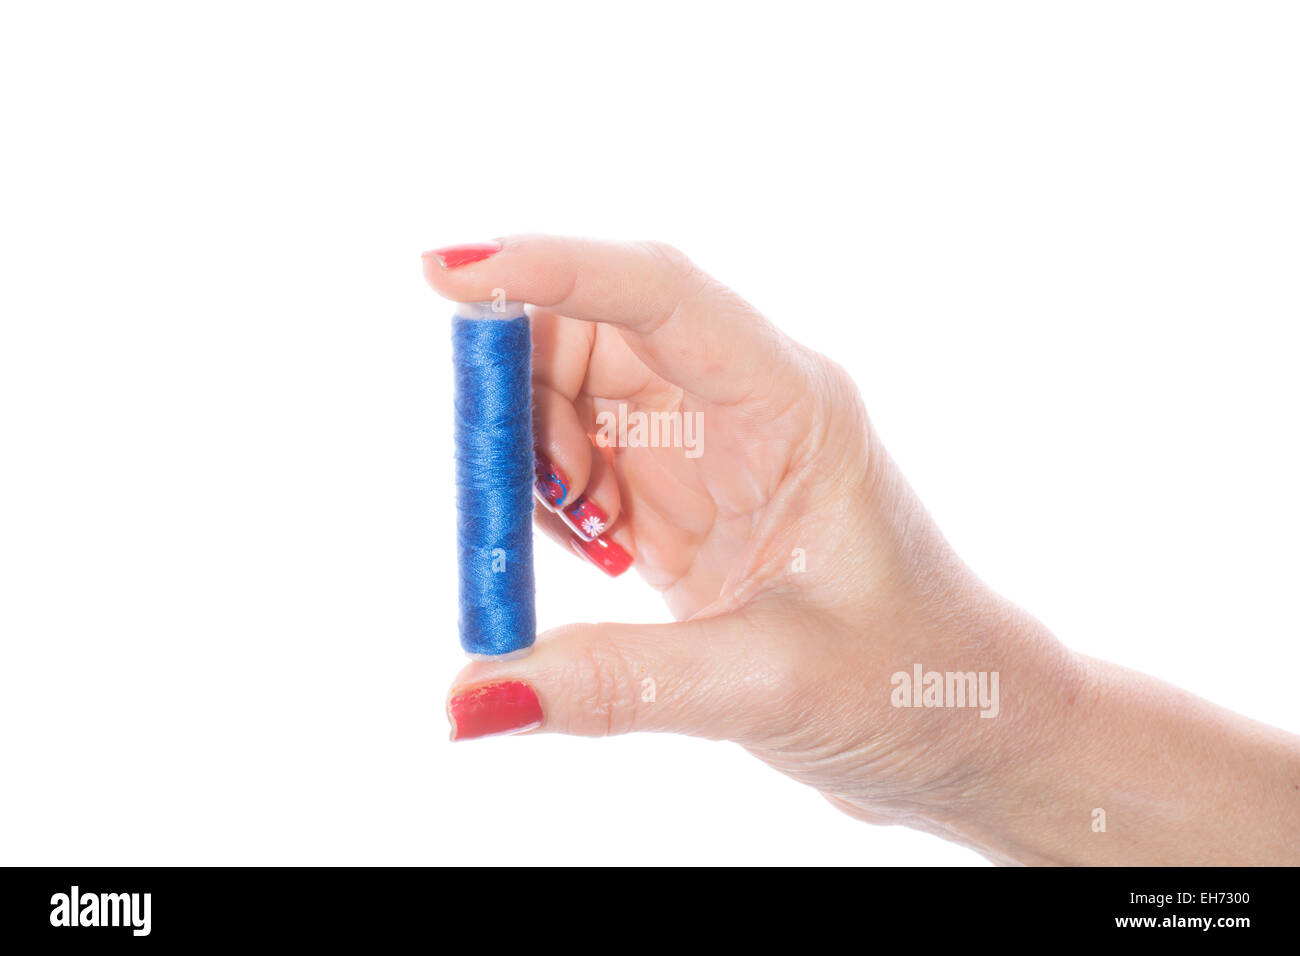 Female hand holding blue sewing thread on a white background Stock Photo